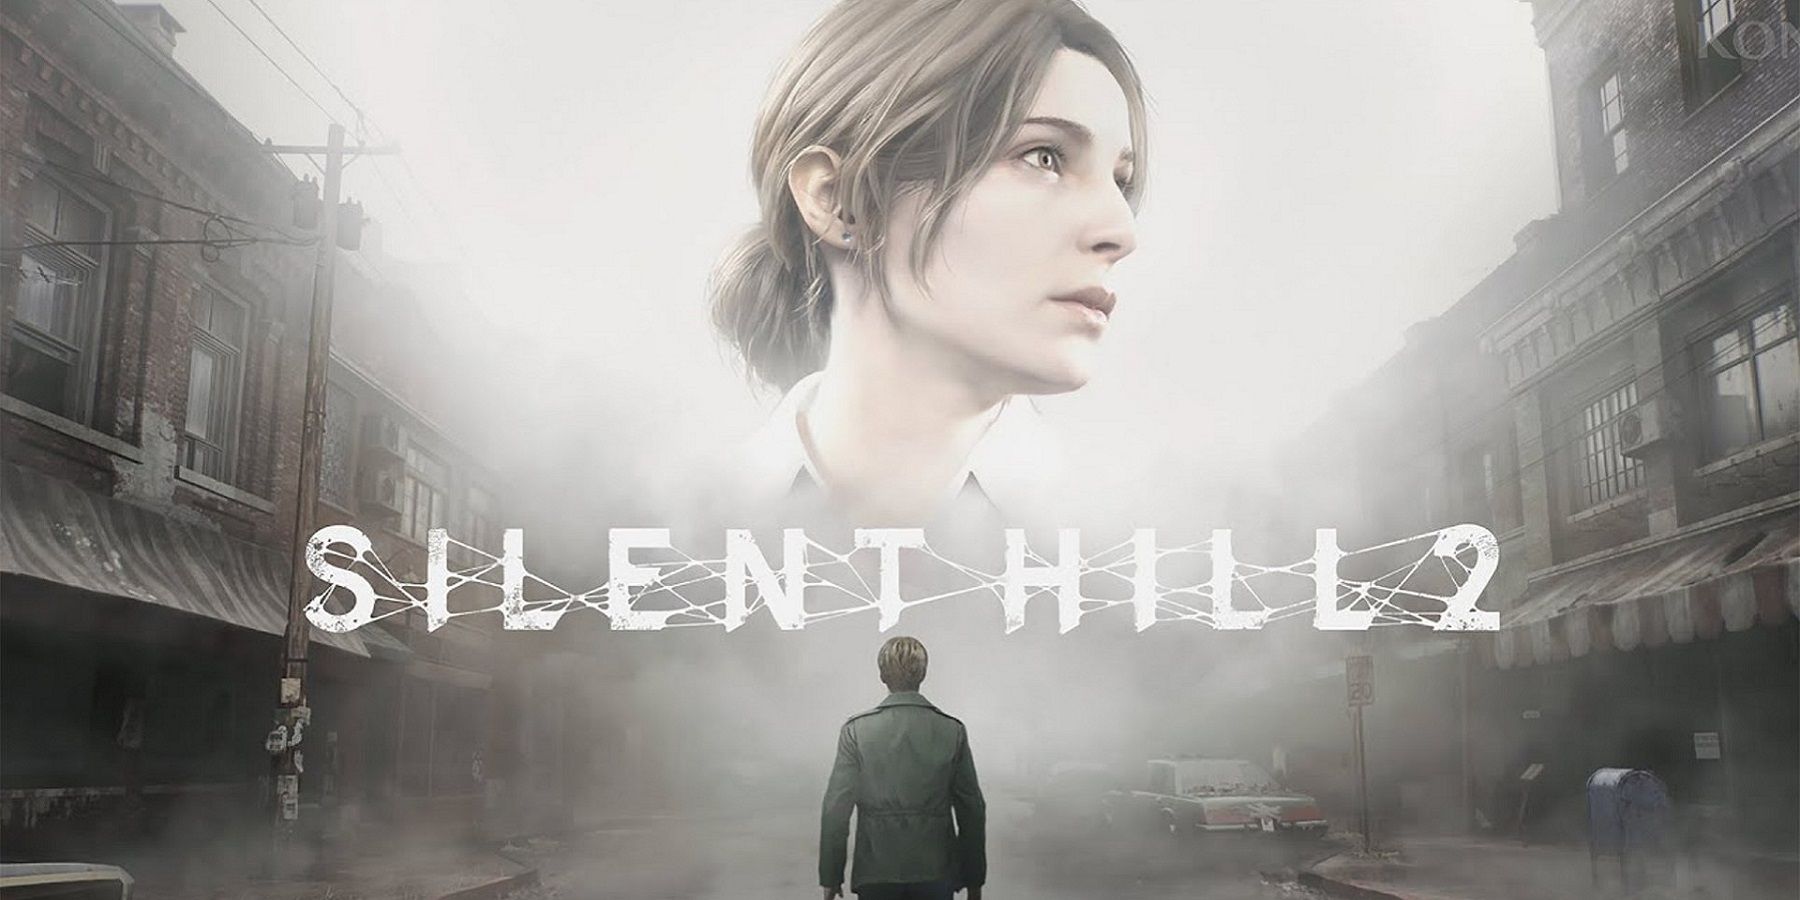 James Sunderland looking up at the Silent Hill 2 logo with the ghostly image of Mary in the sky.